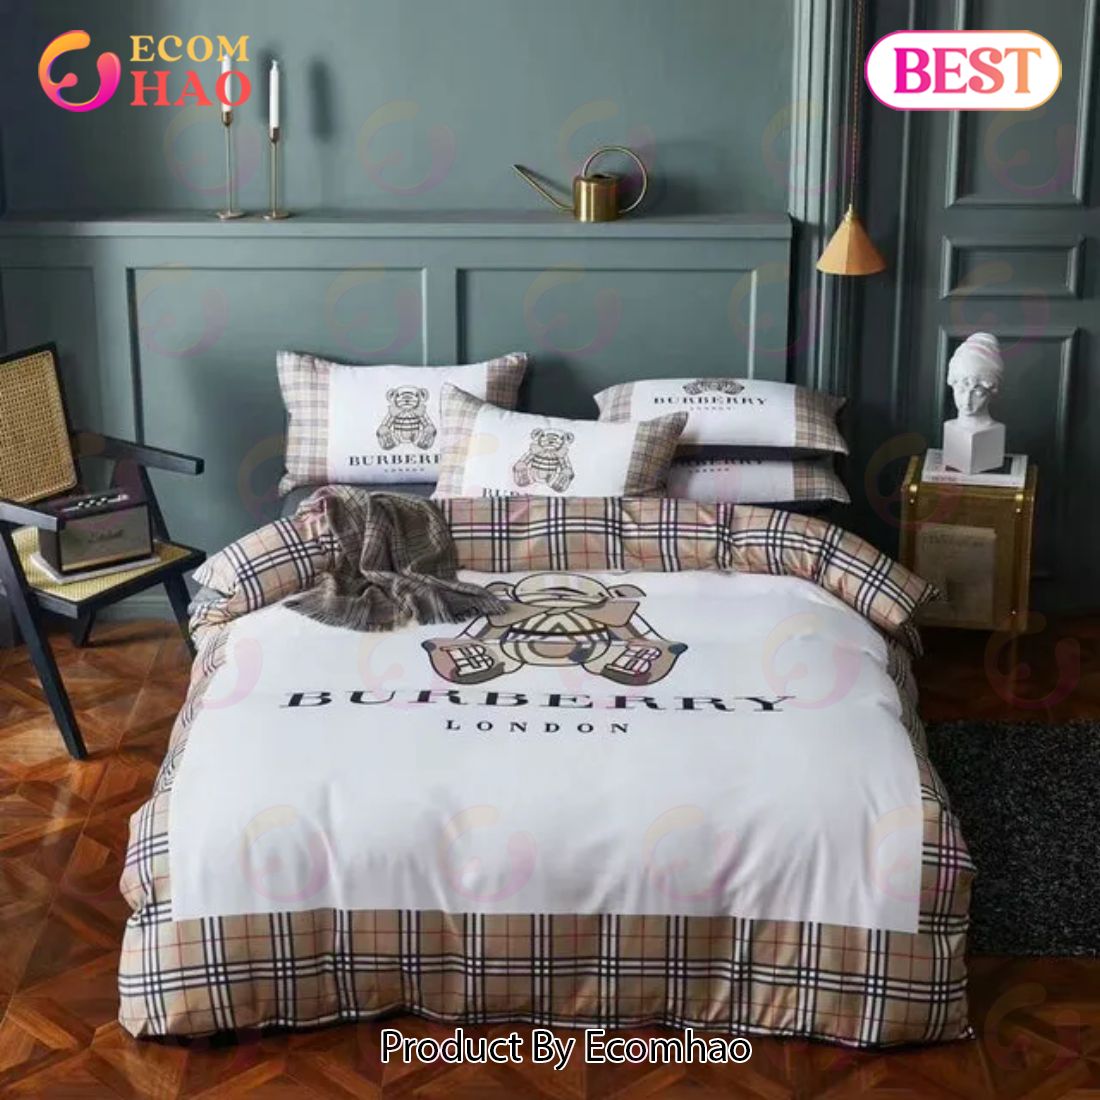 Burberry Bedding Sets Printed Bedding Sets Quilt Sets Duvet Cover Luxury Brand Bedding Decor Bedroom Sets Best Luxury Bed Sets Gift Thankgivings And Christmas